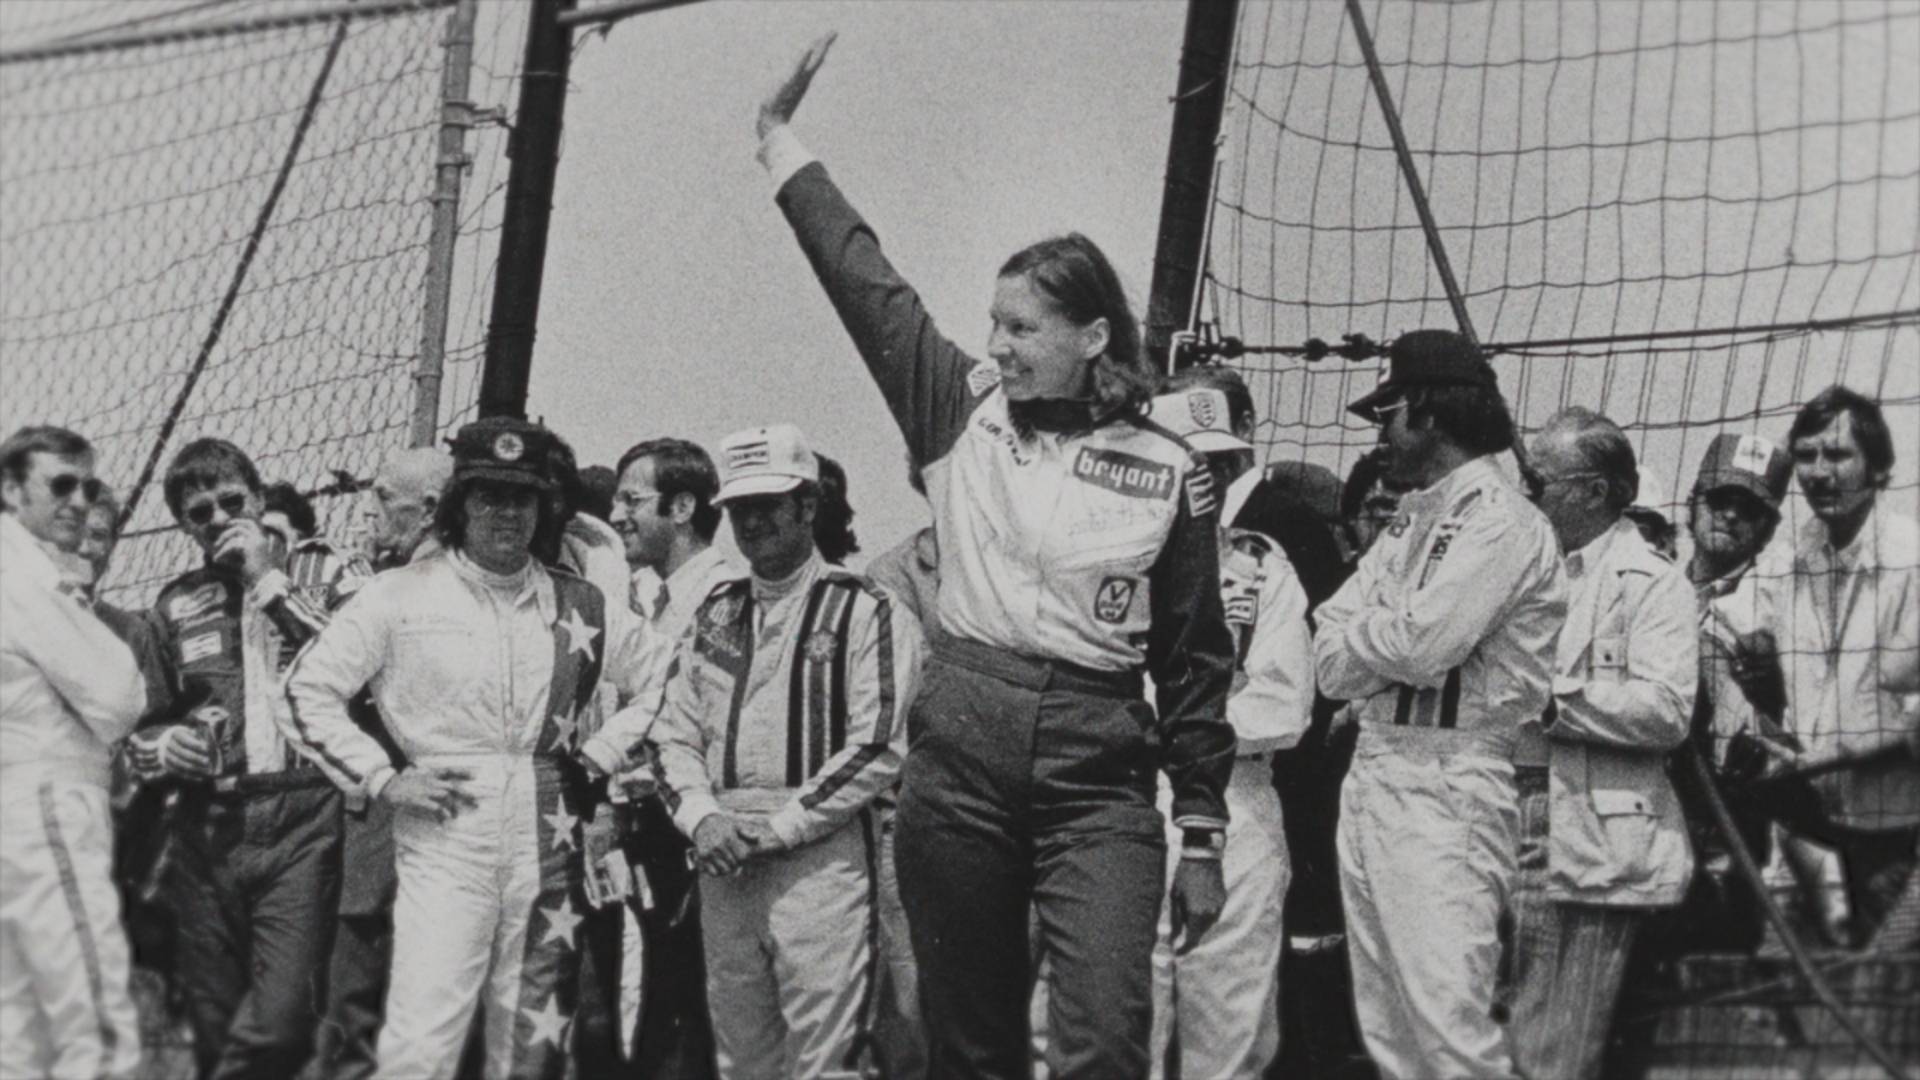 Janet Guthrie – The First Female to Ever Qualify and Race in the Indy 500